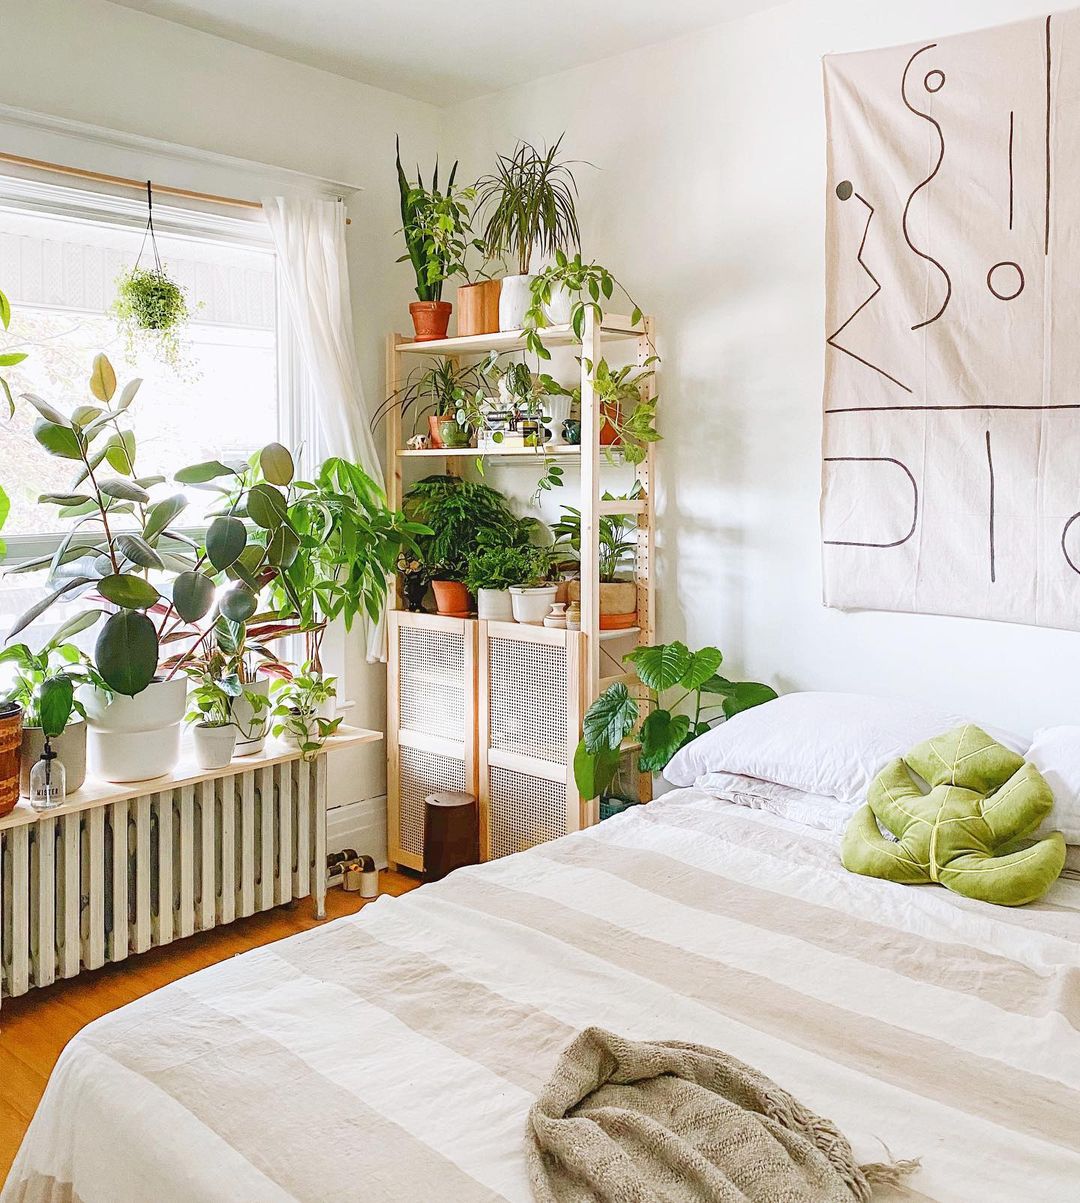 Neutral bedroom with plants. Photo by Instagram user @leaves.and.bones